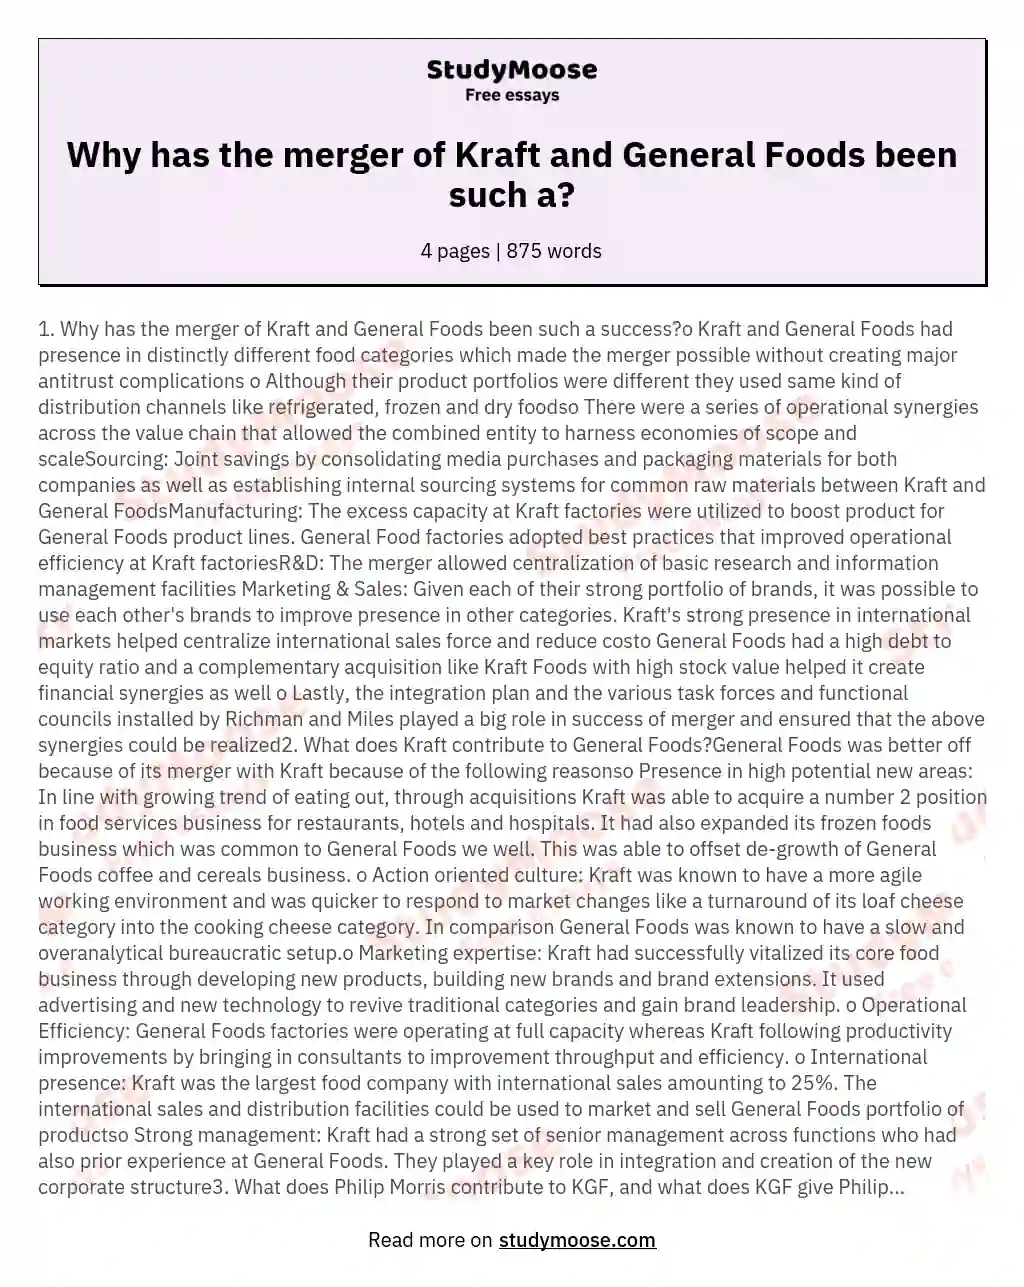 Why has the merger of Kraft and General Foods been such a? essay